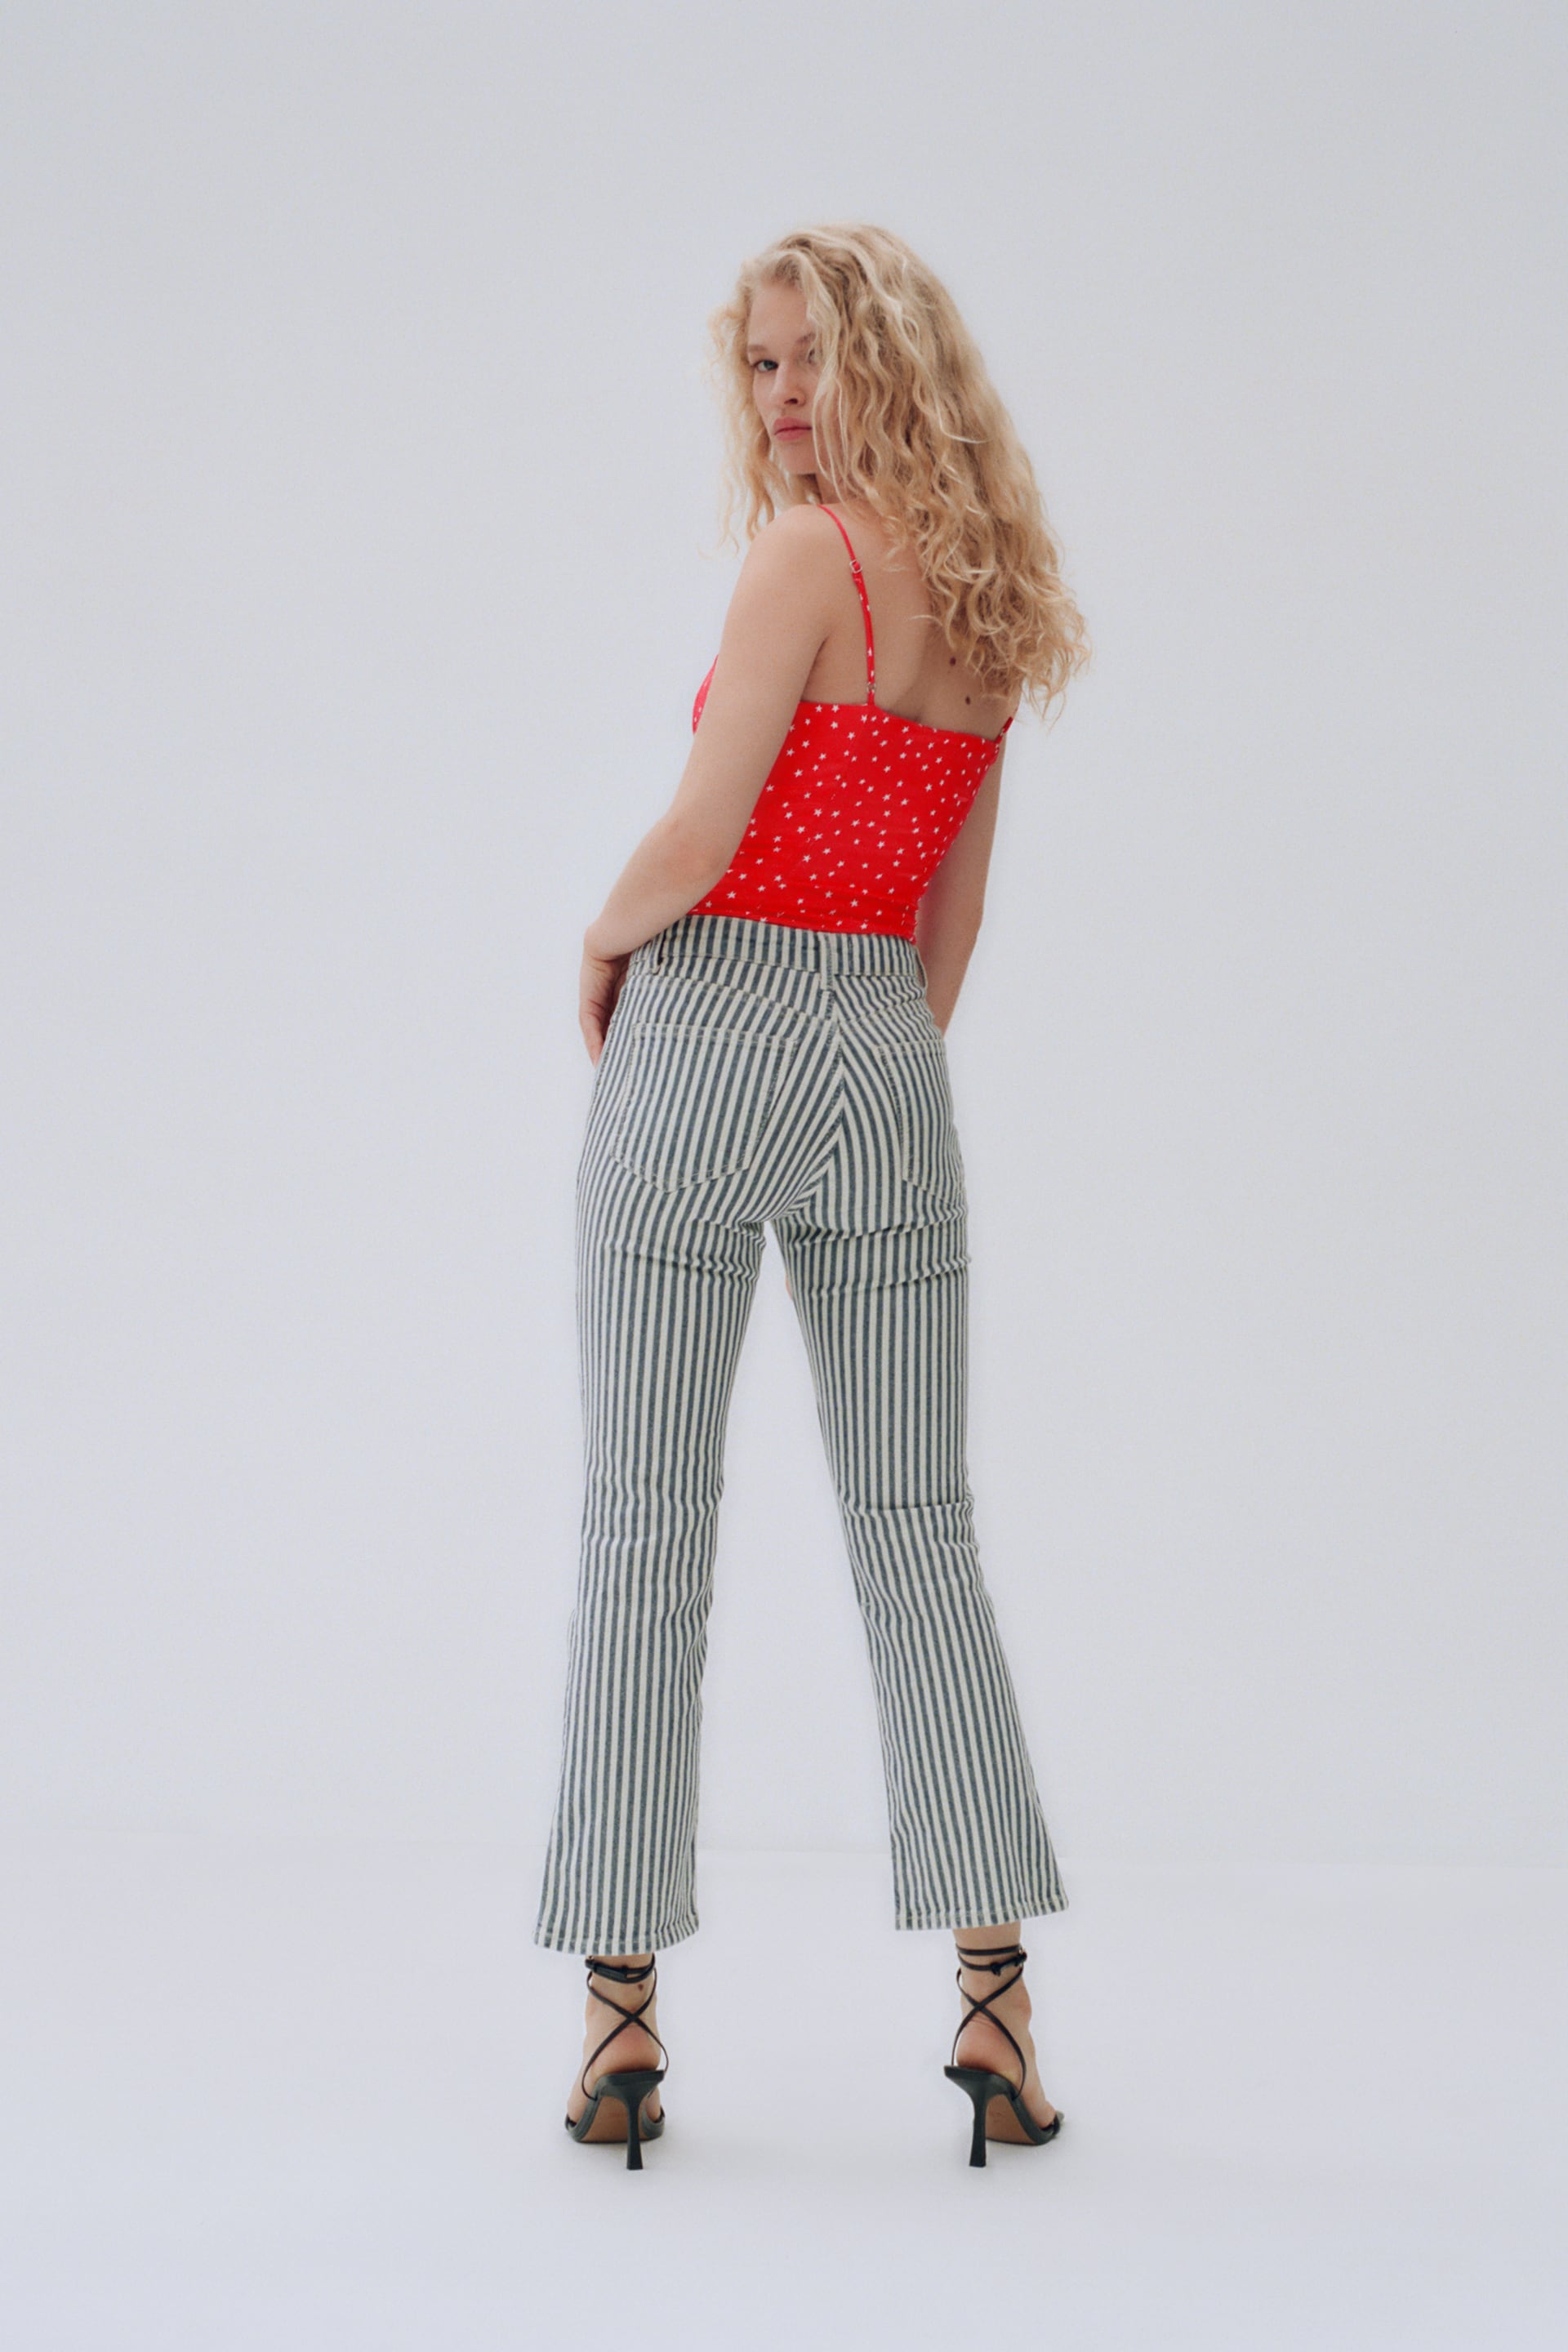 ZARA RED TROUSERS WITH SIDE STRIPE SIZE XS, L Ref. 2267/778 £46.46 -  PicClick UK